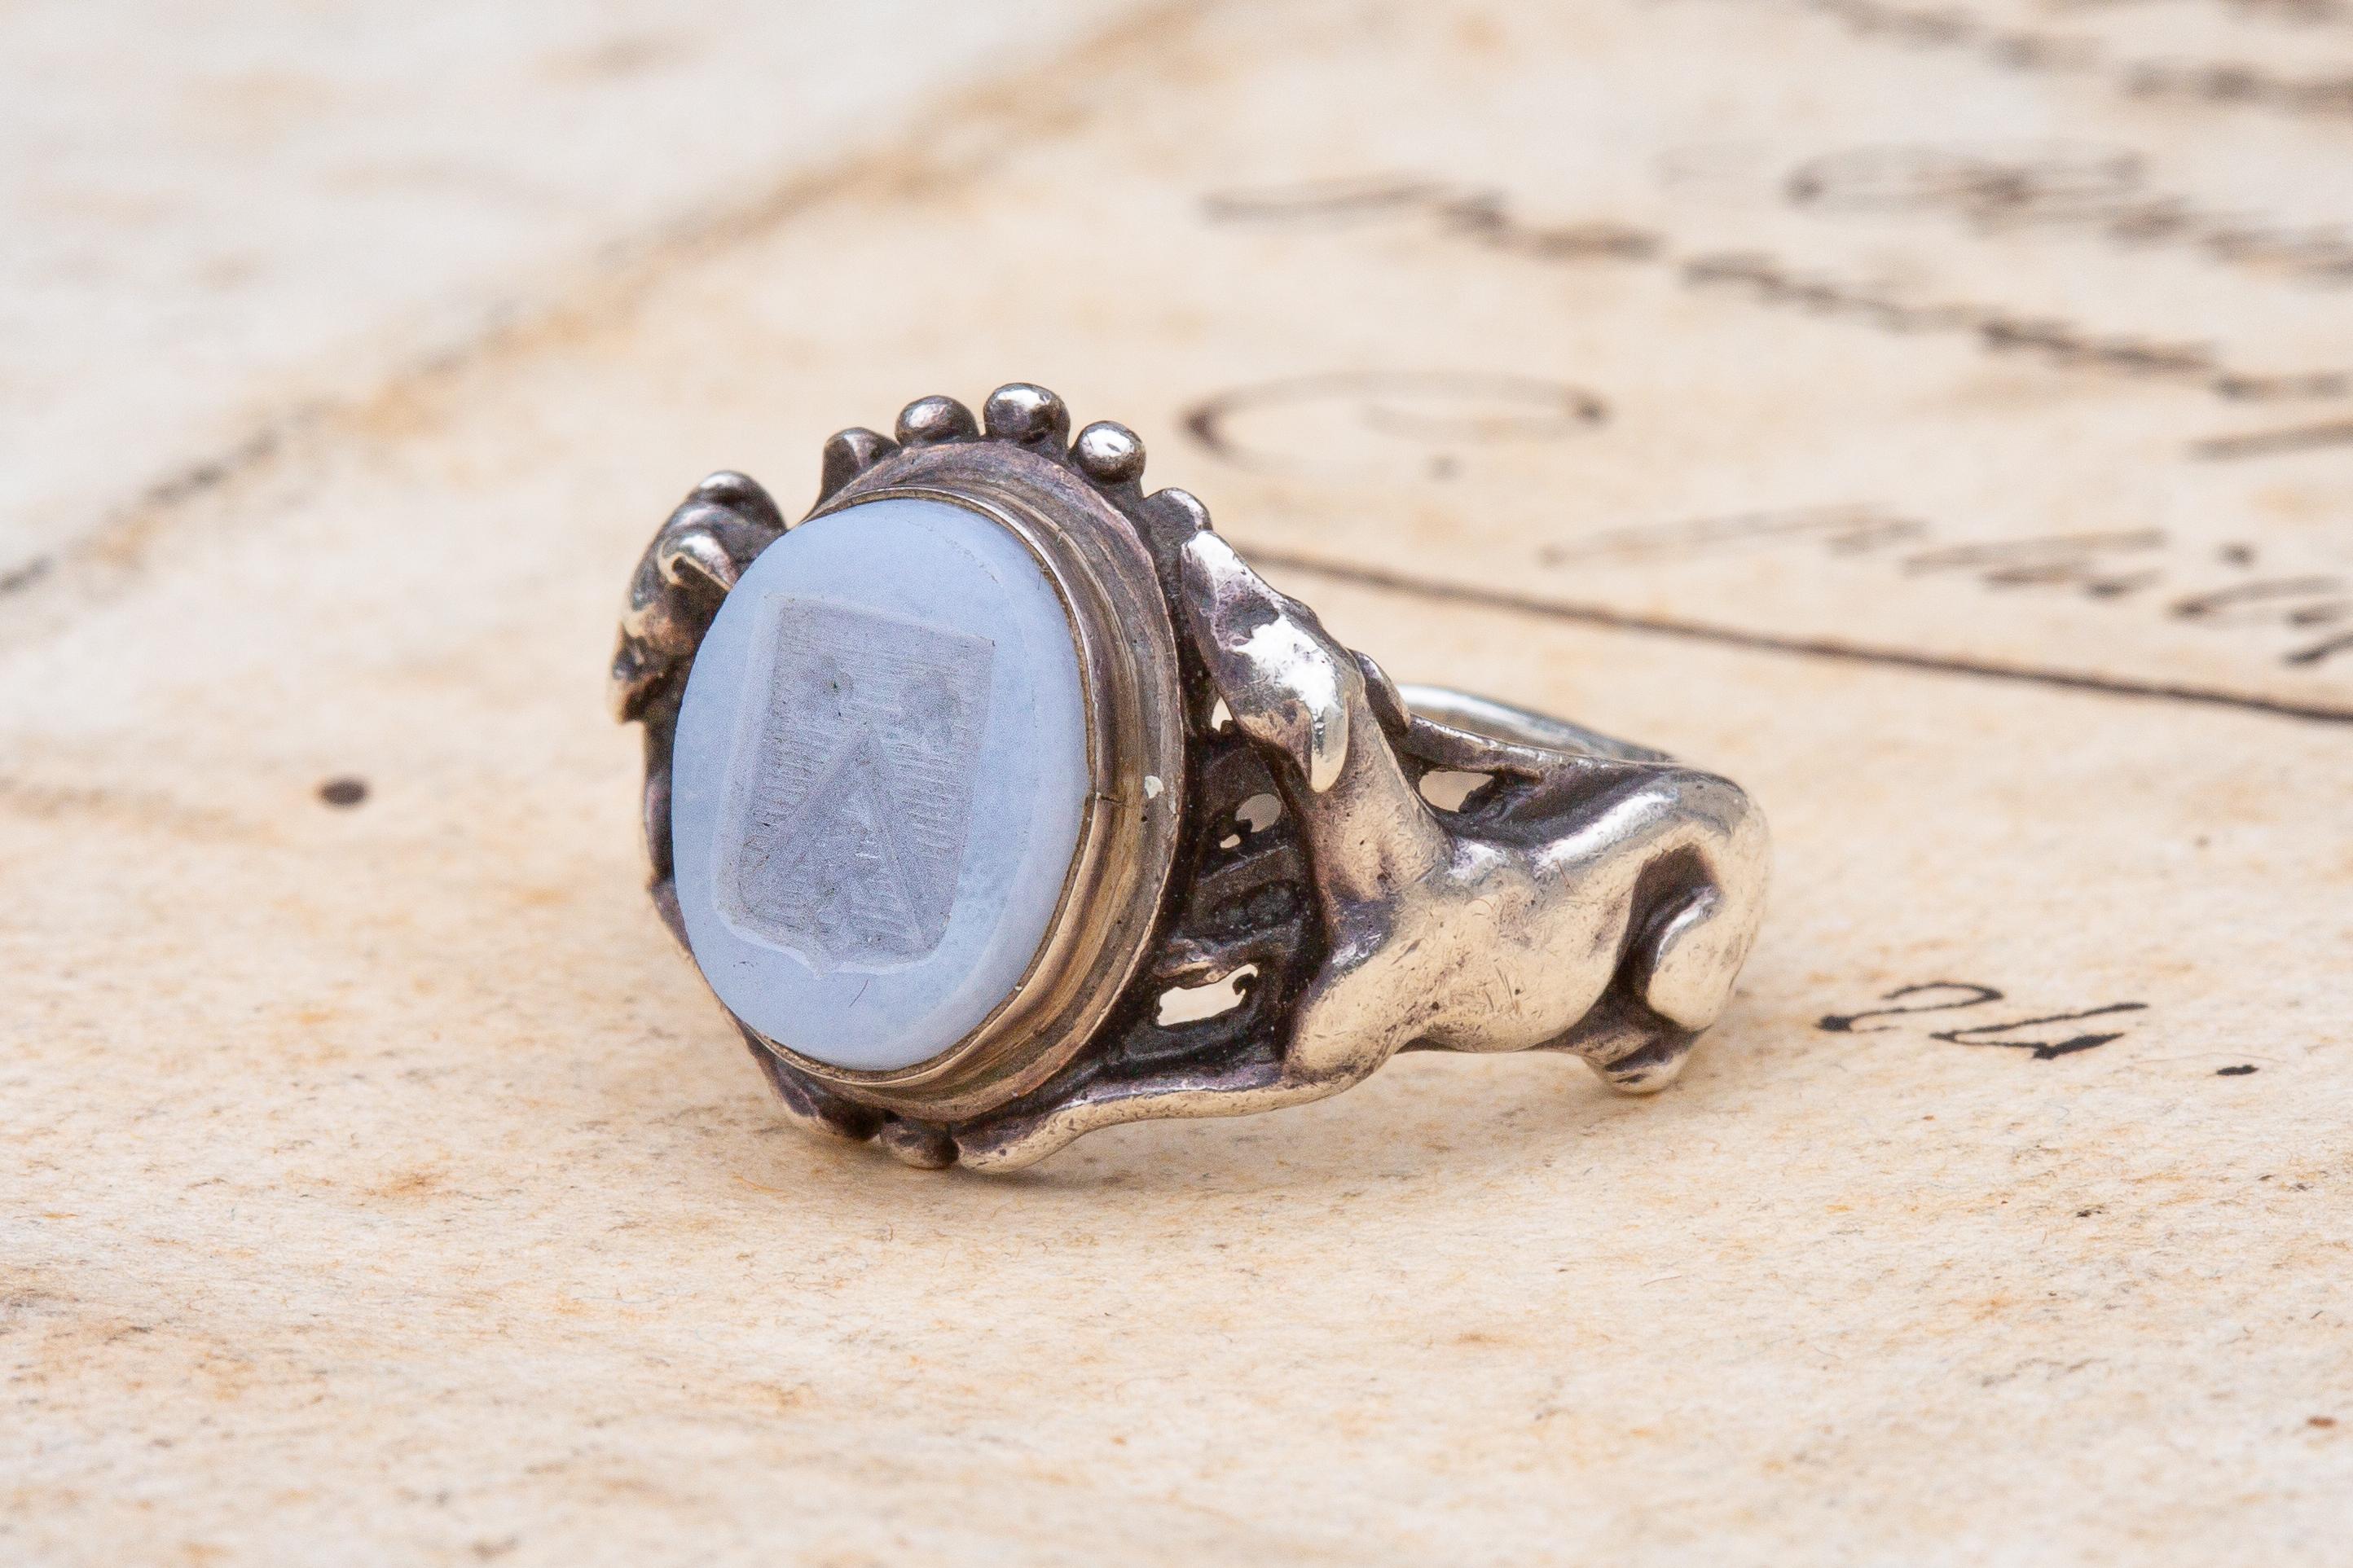 A fantastic French 19th century Neorenaissance silver intaglio ring, in the manner of Jules Wièse and Froment-Meurice, circa 1840. The milky blue chalcedony intaglio is engraved to depict a French heraldic family coat of arms with two roses and a